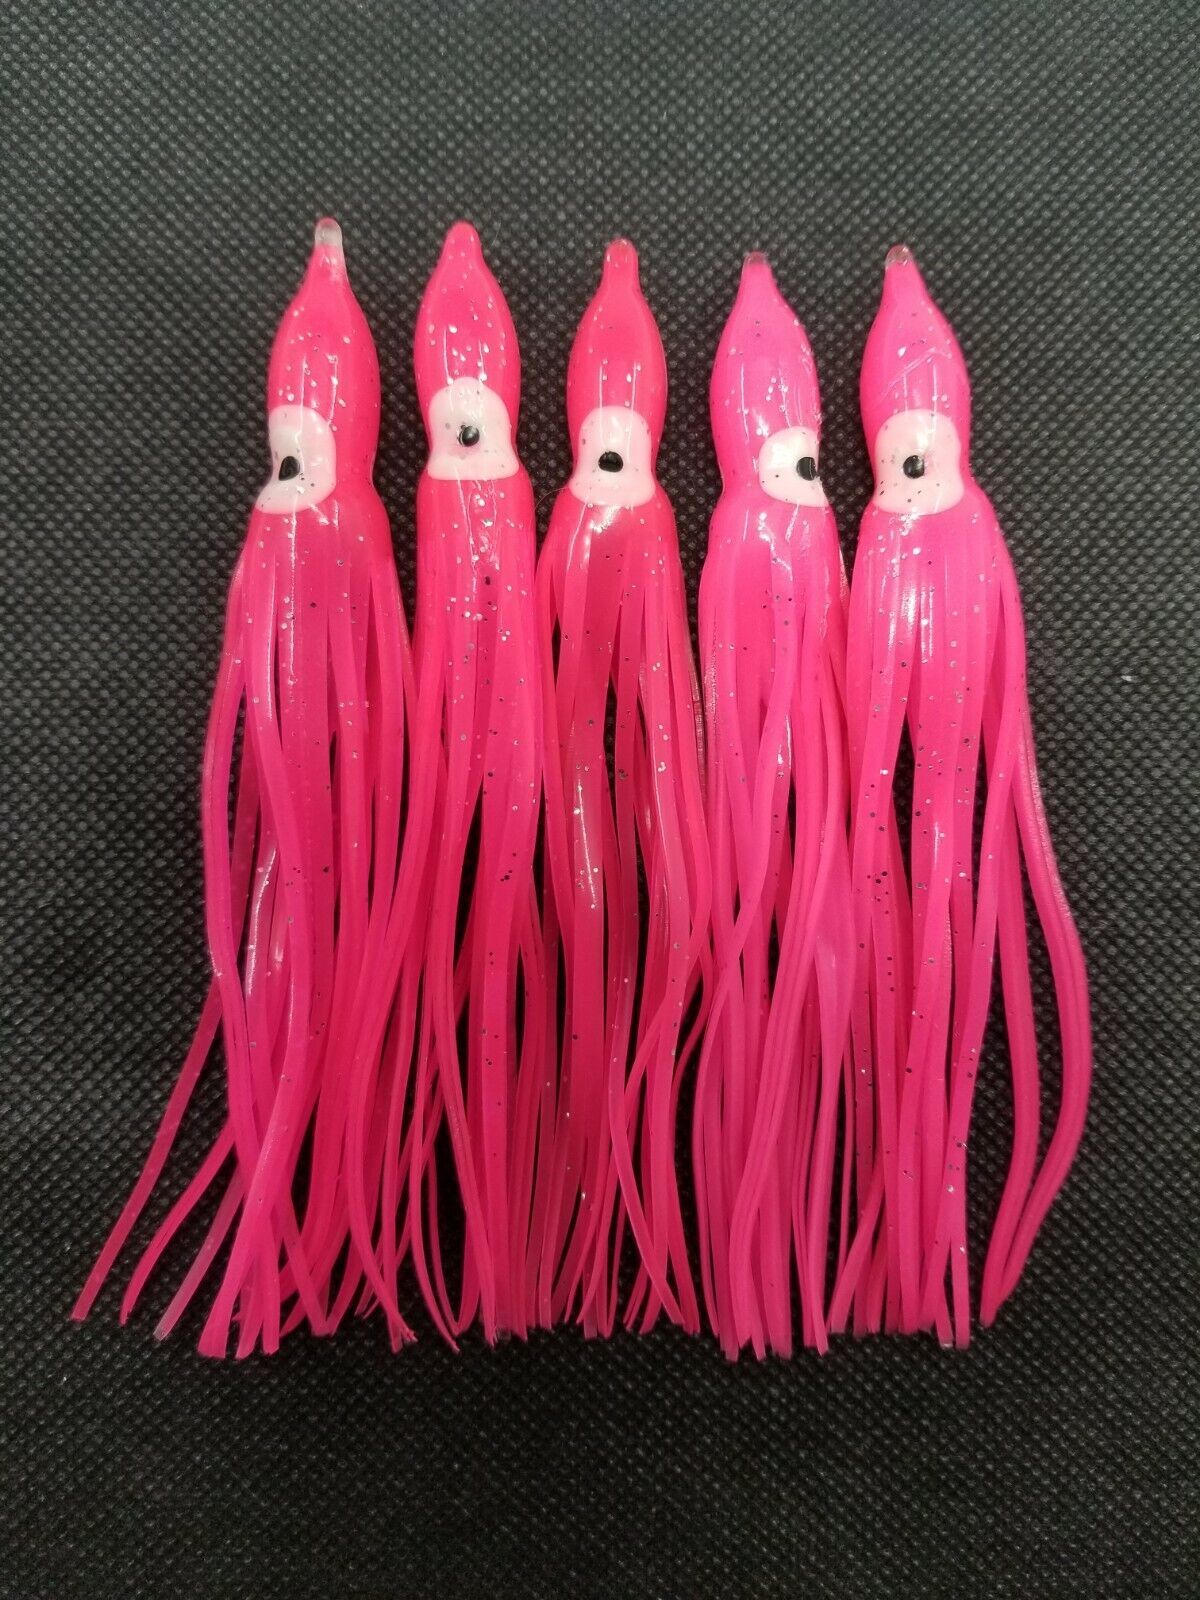 Primary image for 5pk PINKY Naked Trolling Skirt 5 inch 12cm 'DA BEAST' Florida fishing SBFC Small